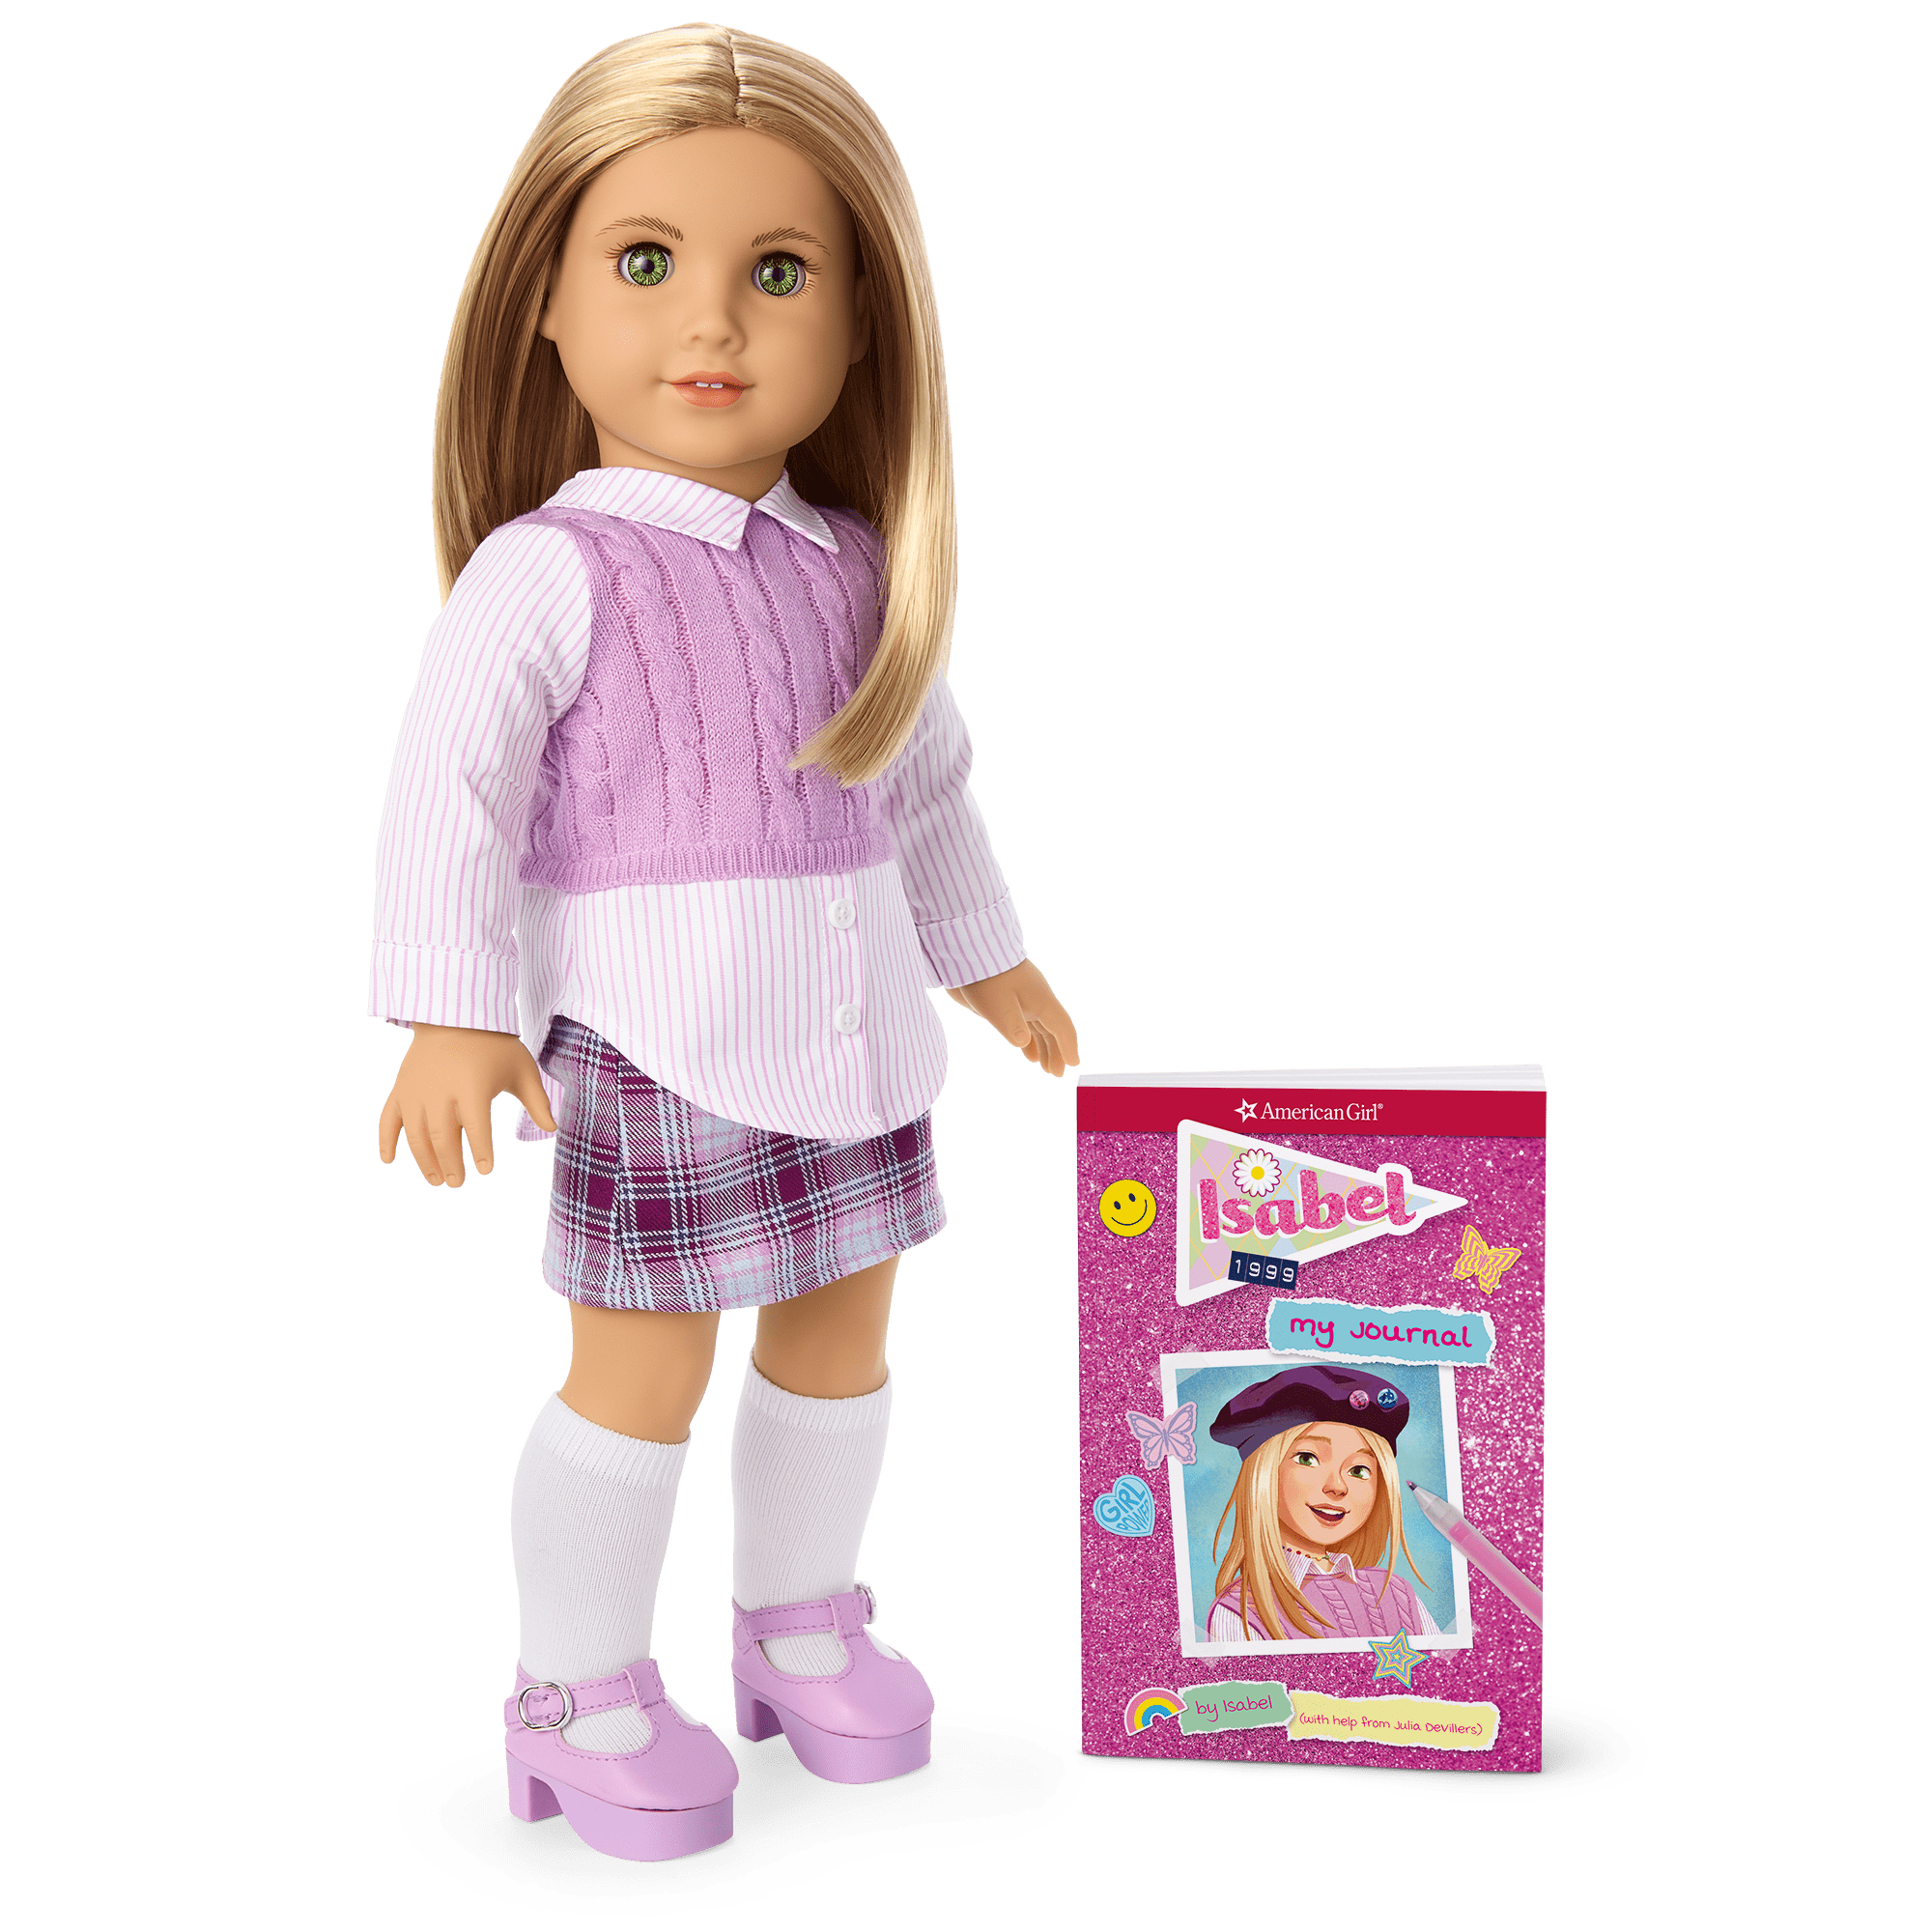 ’90s Twins Isabel’s™ Tennis Gift Set (Historical Characters)